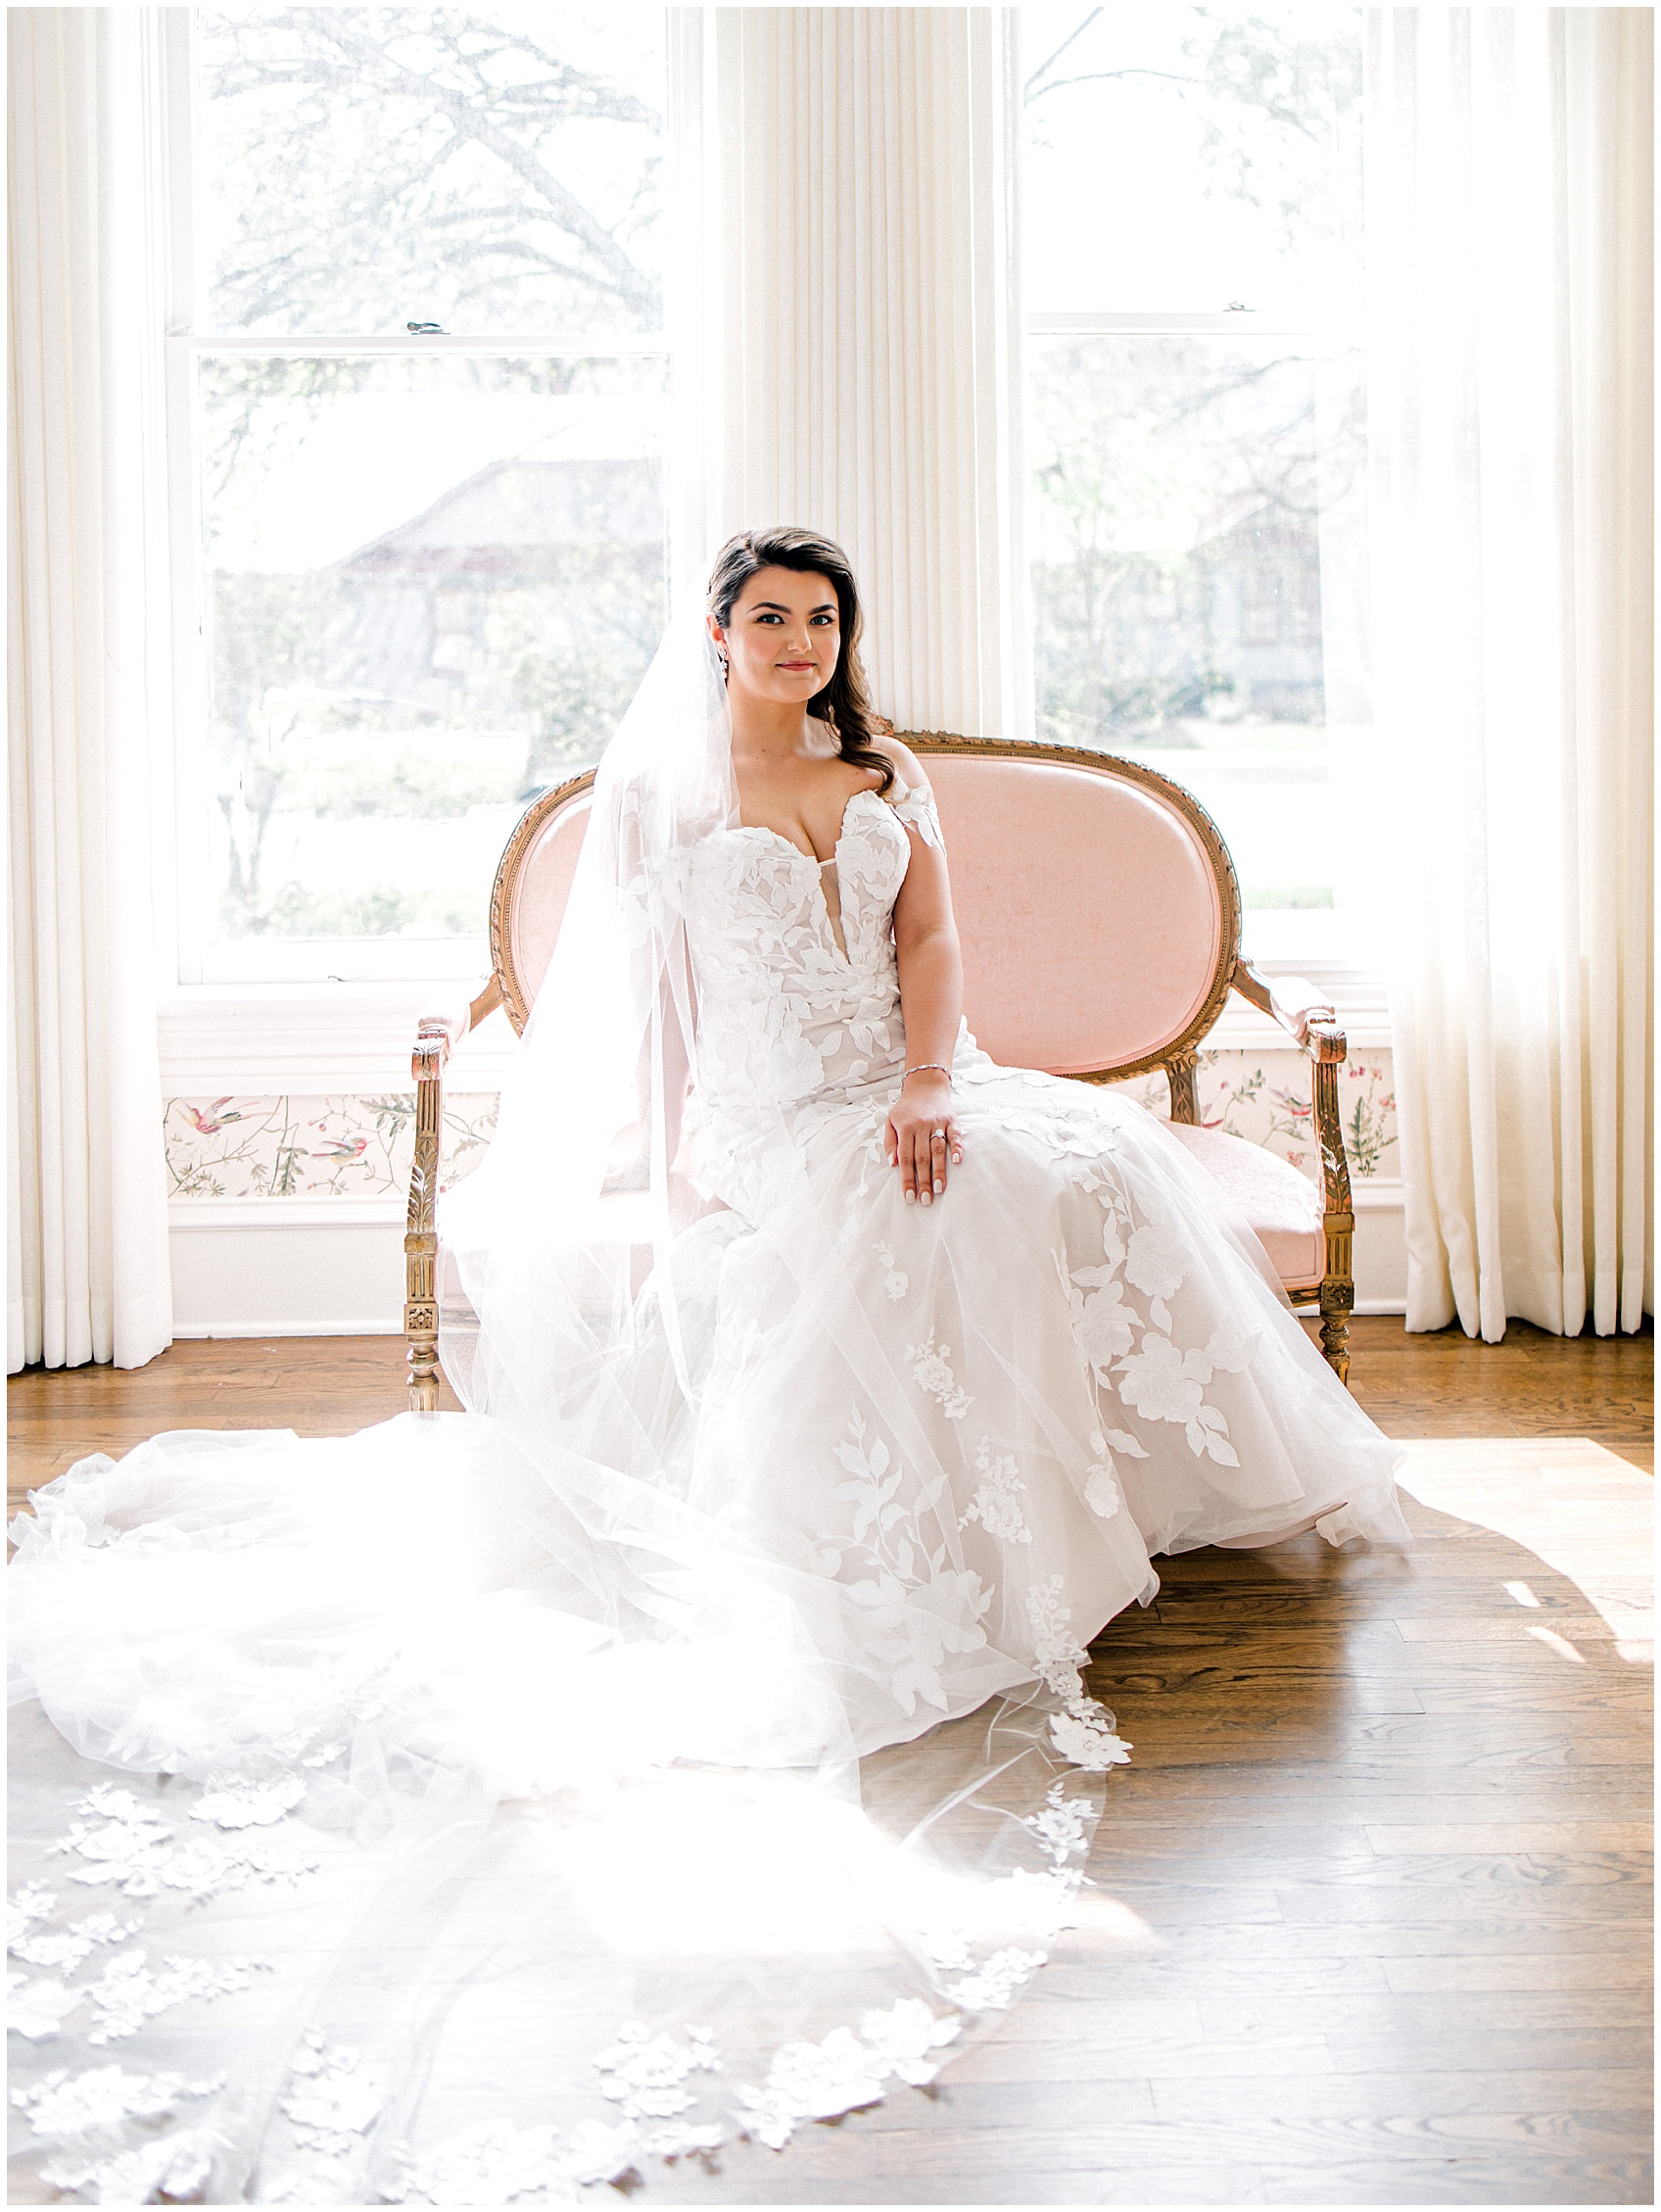 Woodbine Mansion Spring Bridal wedding Photos by Allison Jeffers Photography 0008